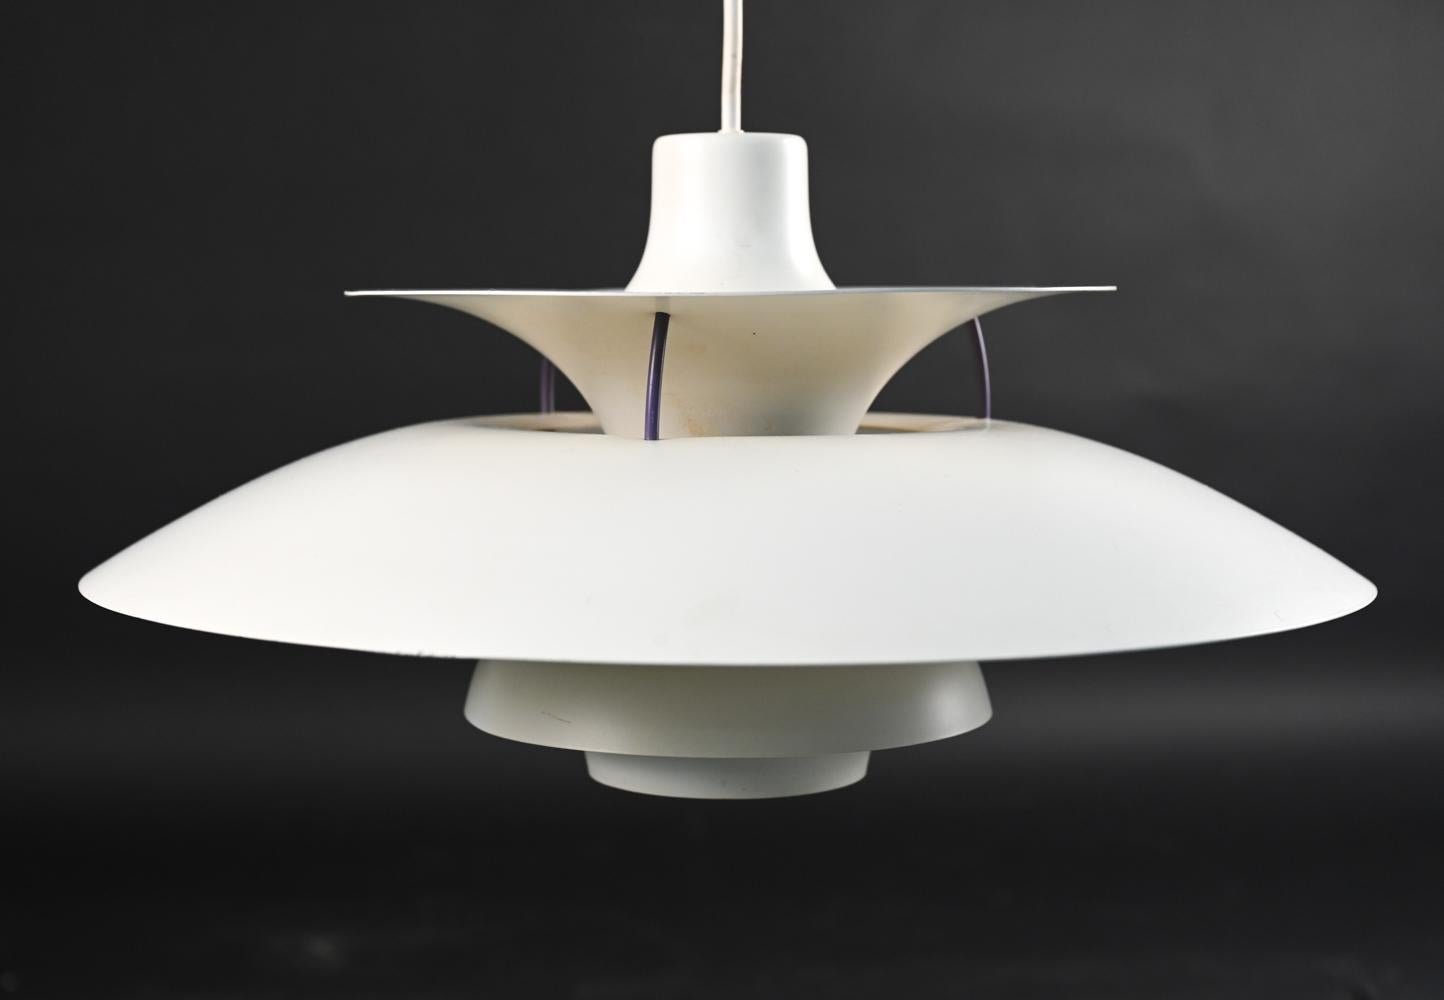 An iconic Danish design that is a mainstay of European homes, restaurants, and libraries, this mid-century modern pendant lamp, the PH5 Pendant Lamp, utilizes an ingenious system of shades and reflectors to produce a warm, welcoming glow. Designed